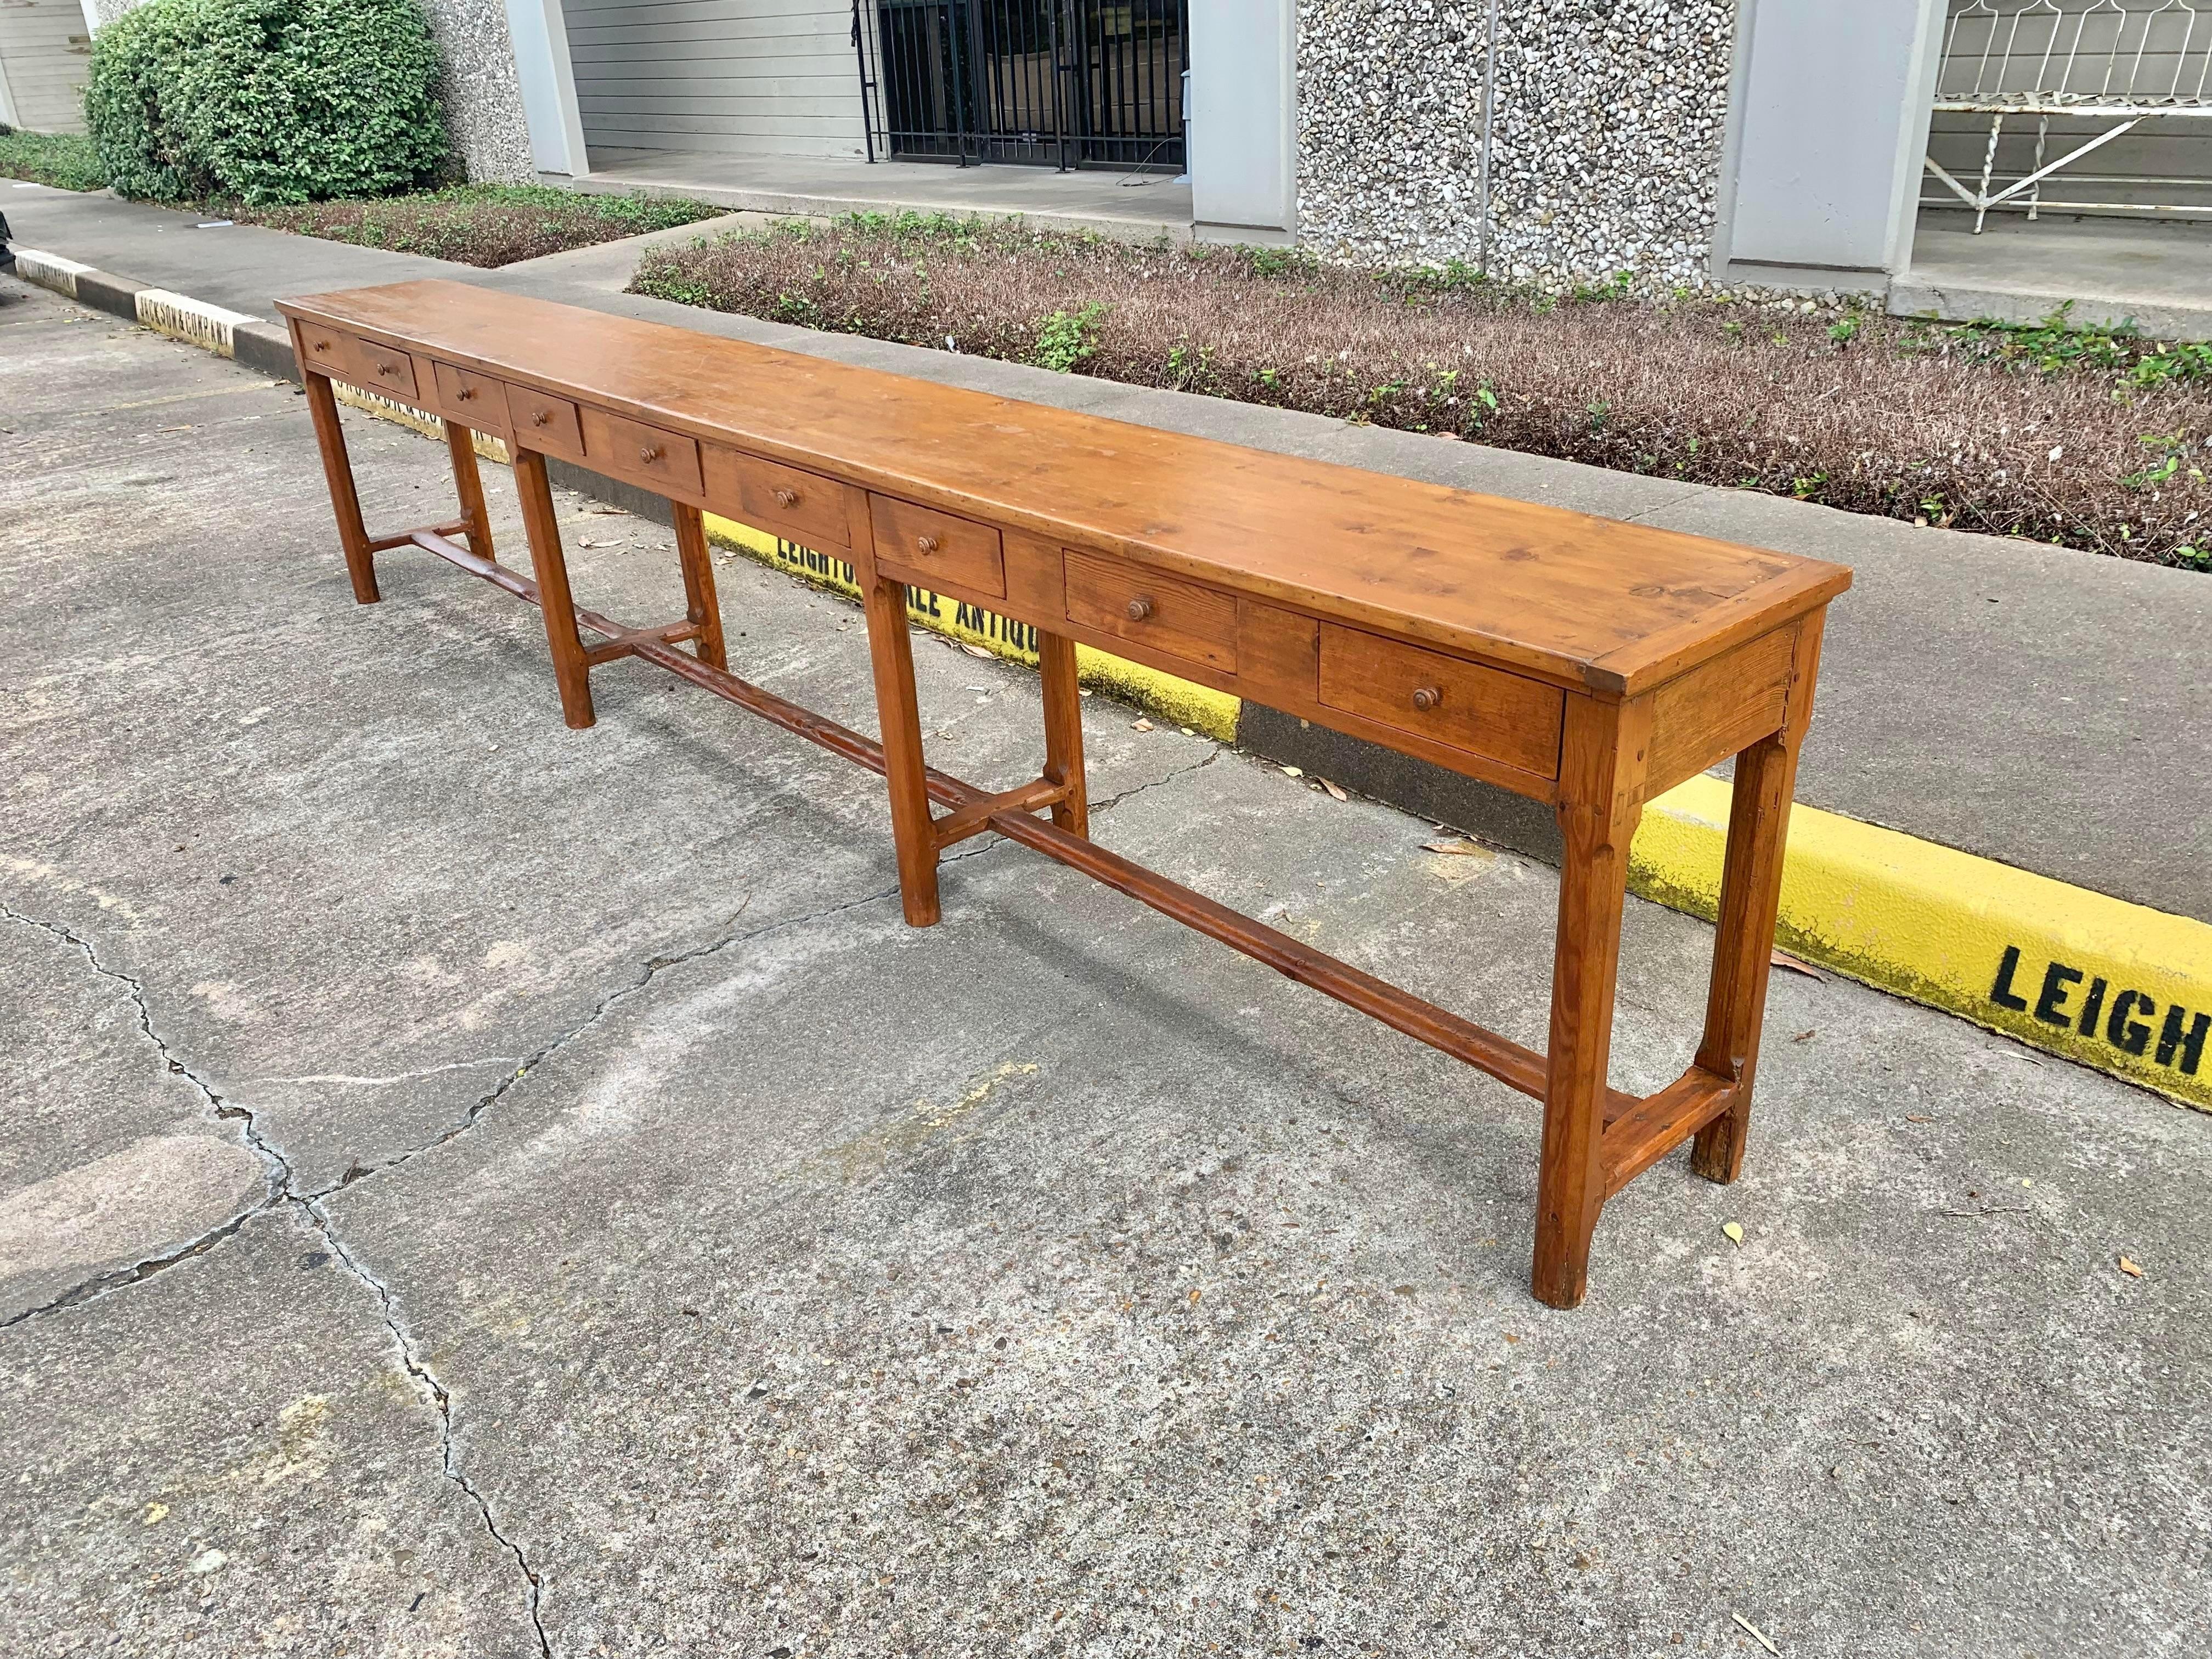 Grand in size, this 19th century French Table was once used as a desk by the novices at a convent in Northern France. Crafted from aged pine and wood pegged, the solid plank top is flanked by the traditional French bread board style ends. Each of